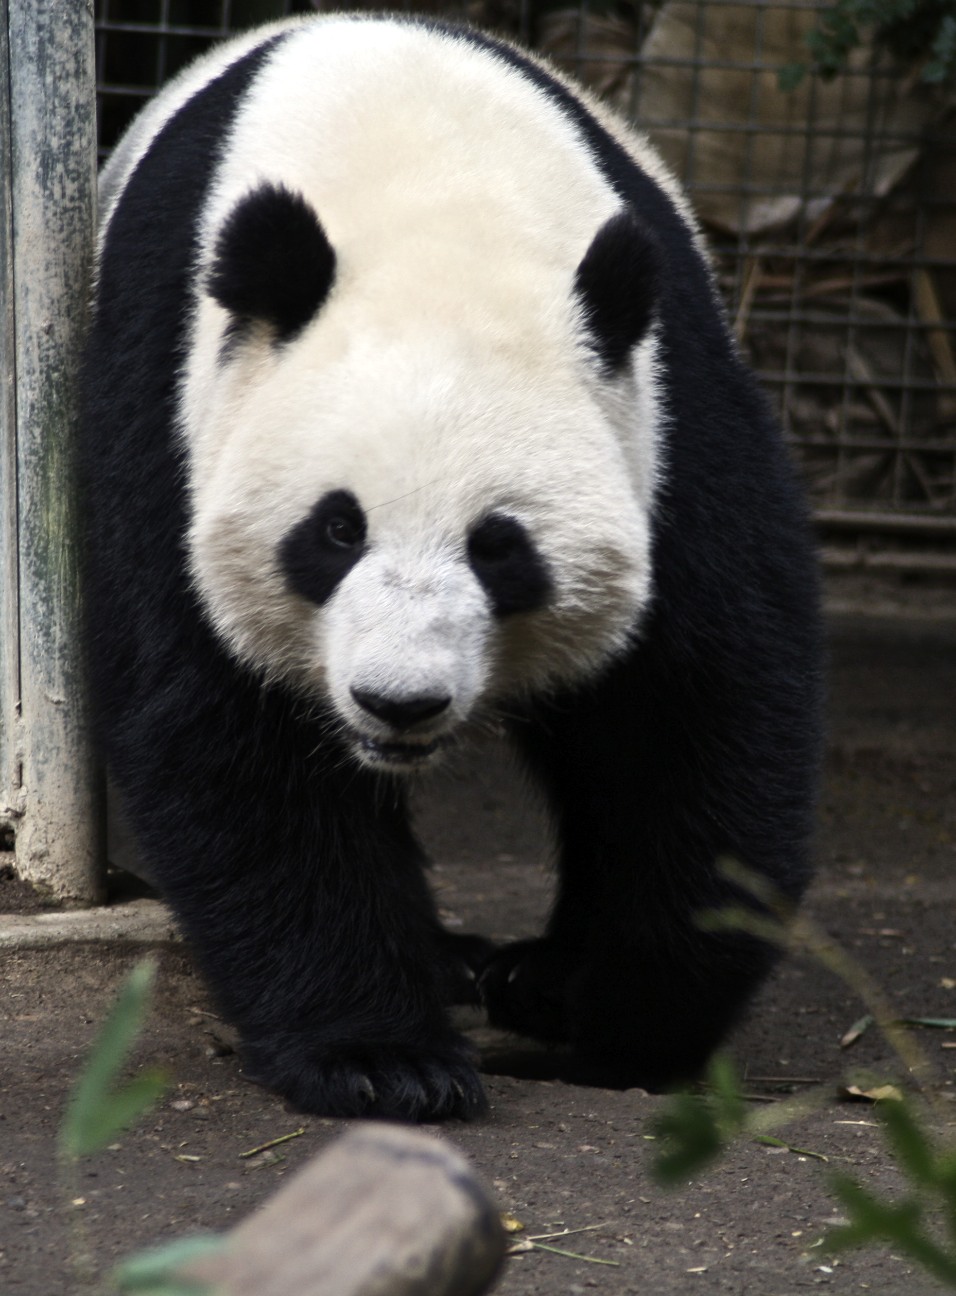 a panda bear is standing with its back paws on the ground